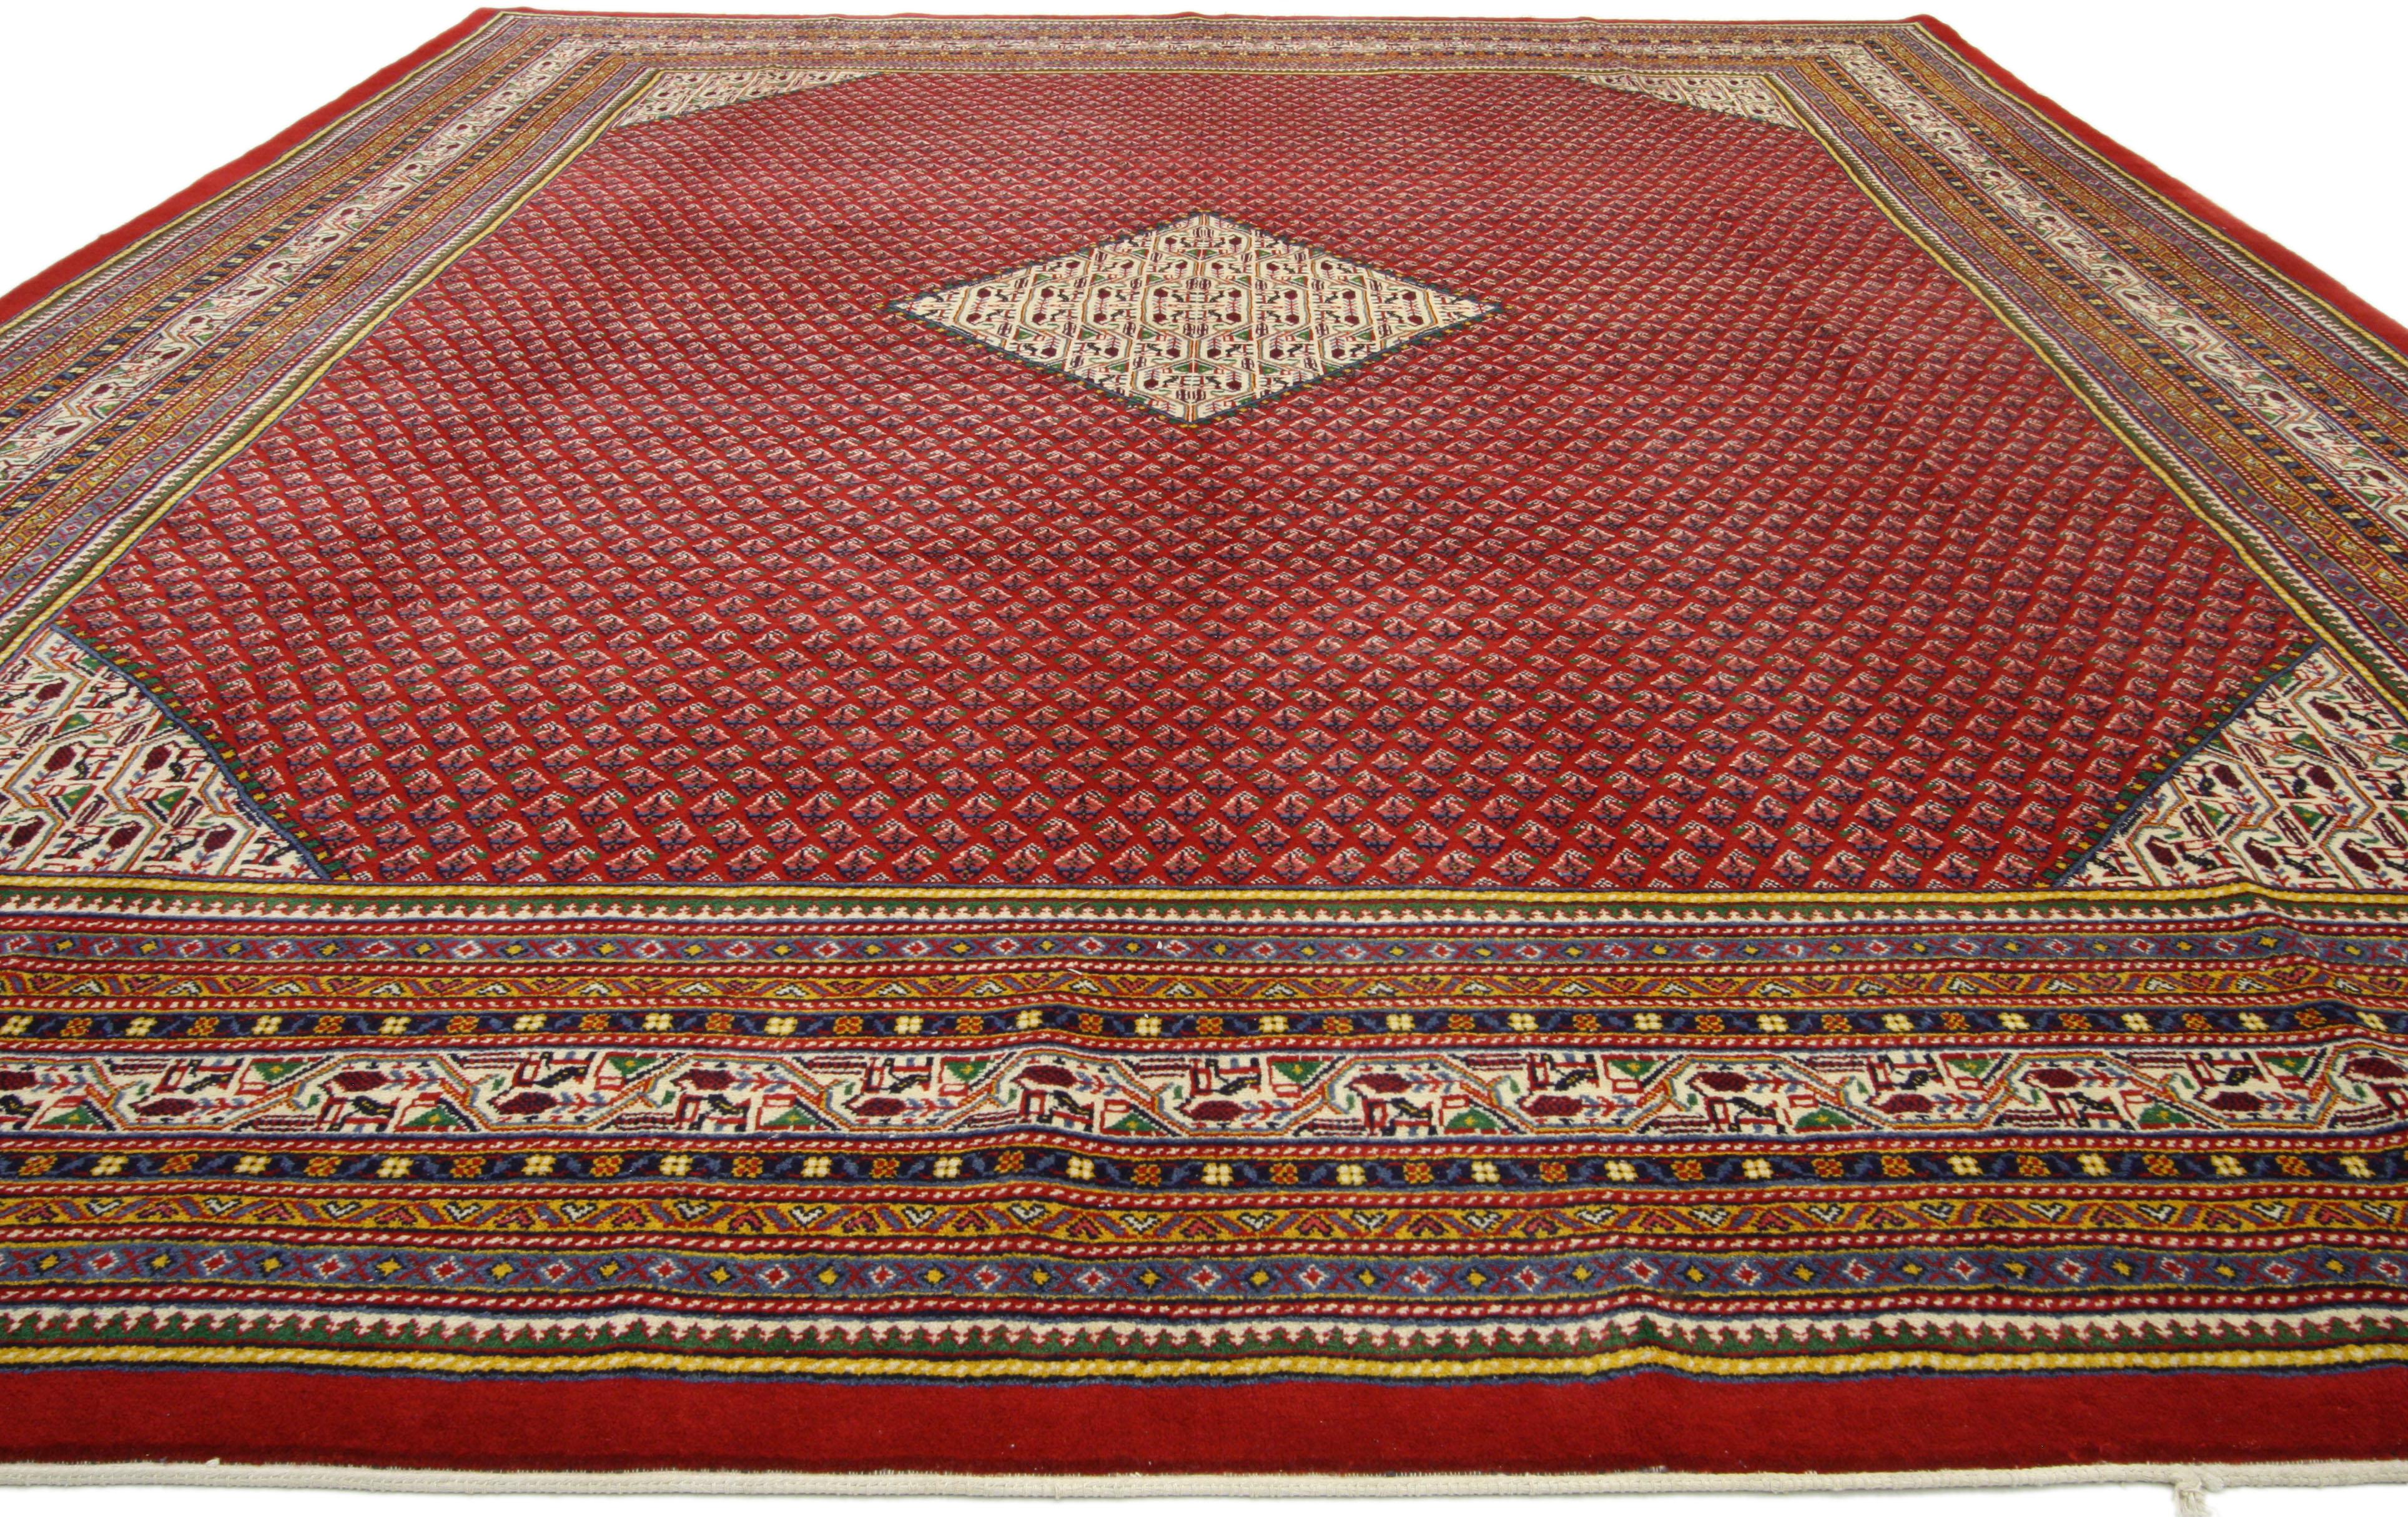 75899, vintage Persian Mahal area rug with traditional style. This hand knotted wool vintage Persian Mahal rug features a diamond-shaped center medallion floating on an abrashed scarlet red field. An all-over small-scale mir boteh pattern decorates